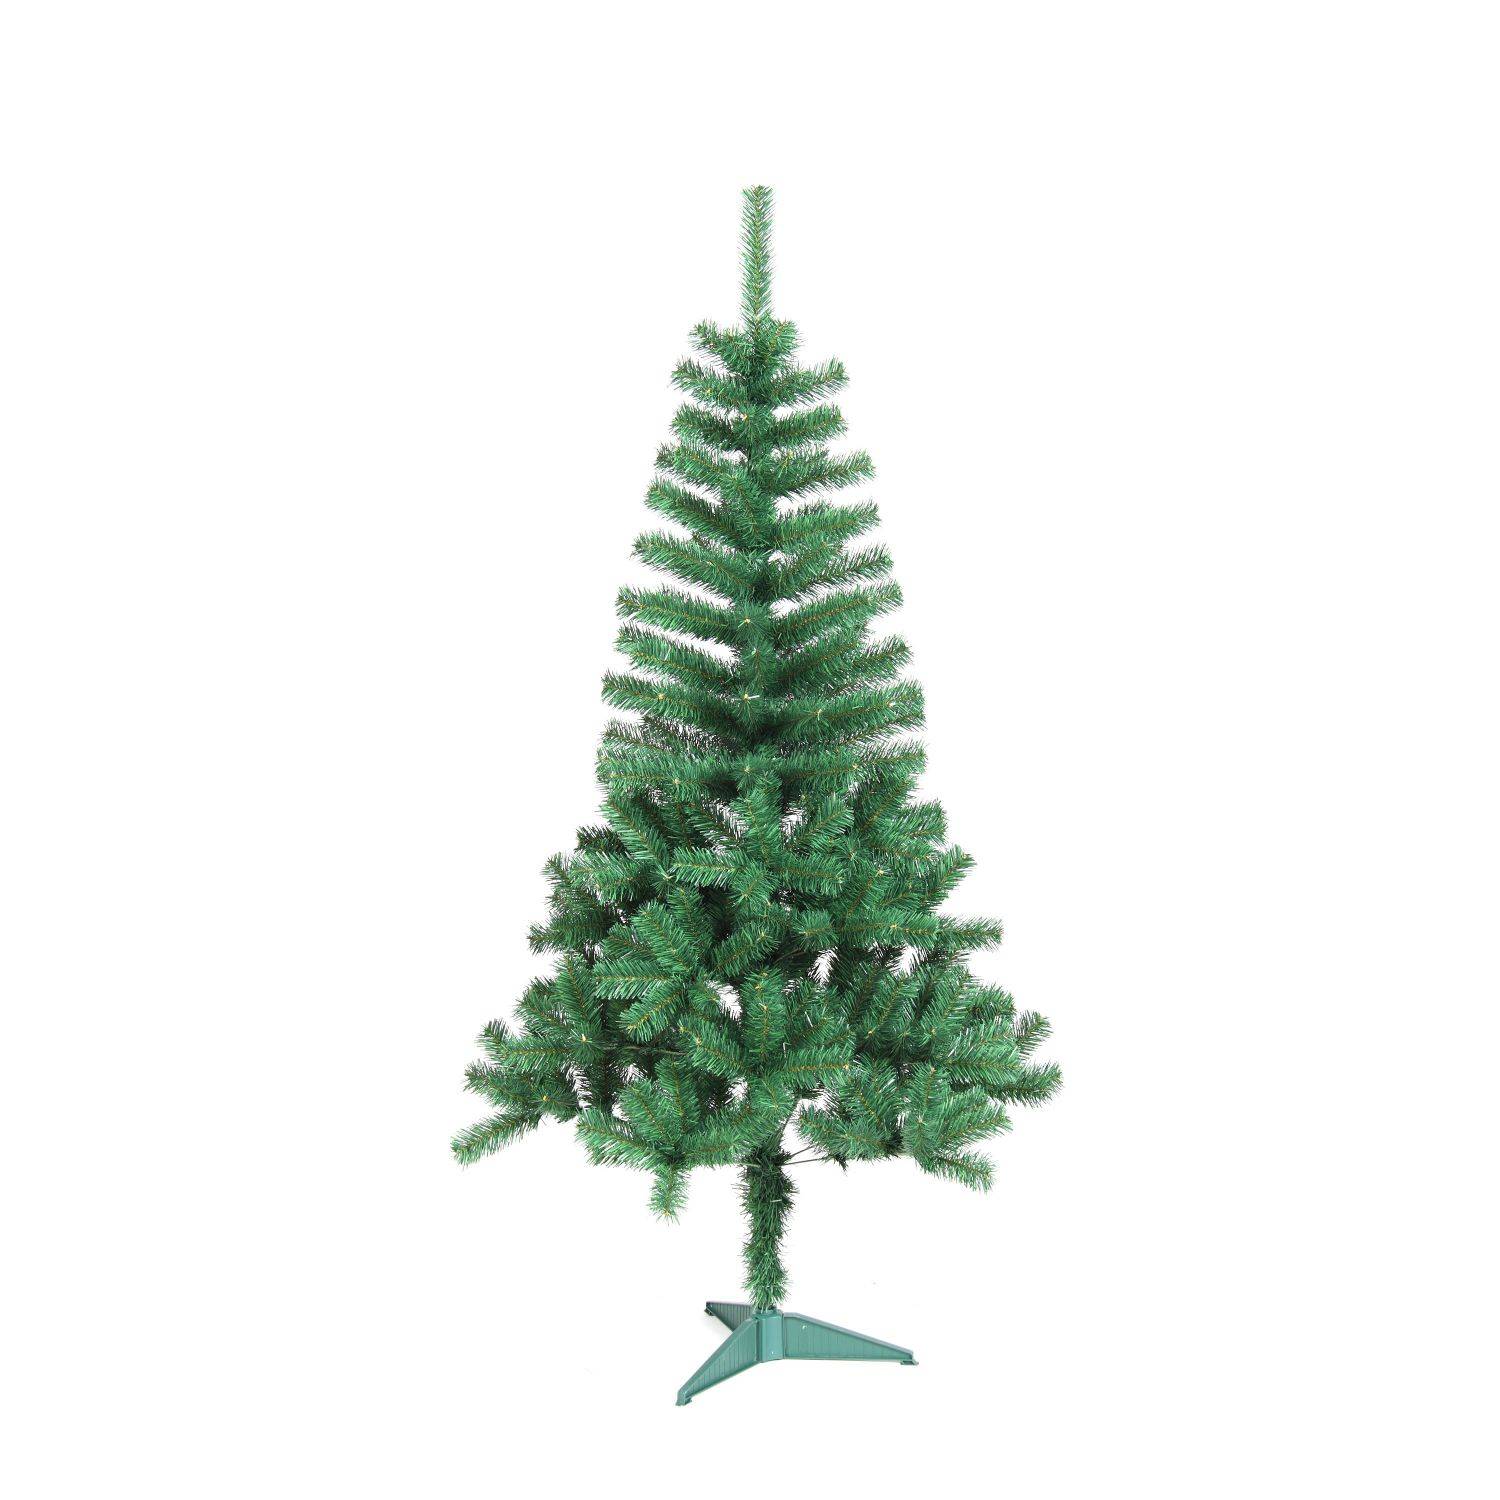 Artificial Christmas tree 150 cm, stand included Photo2